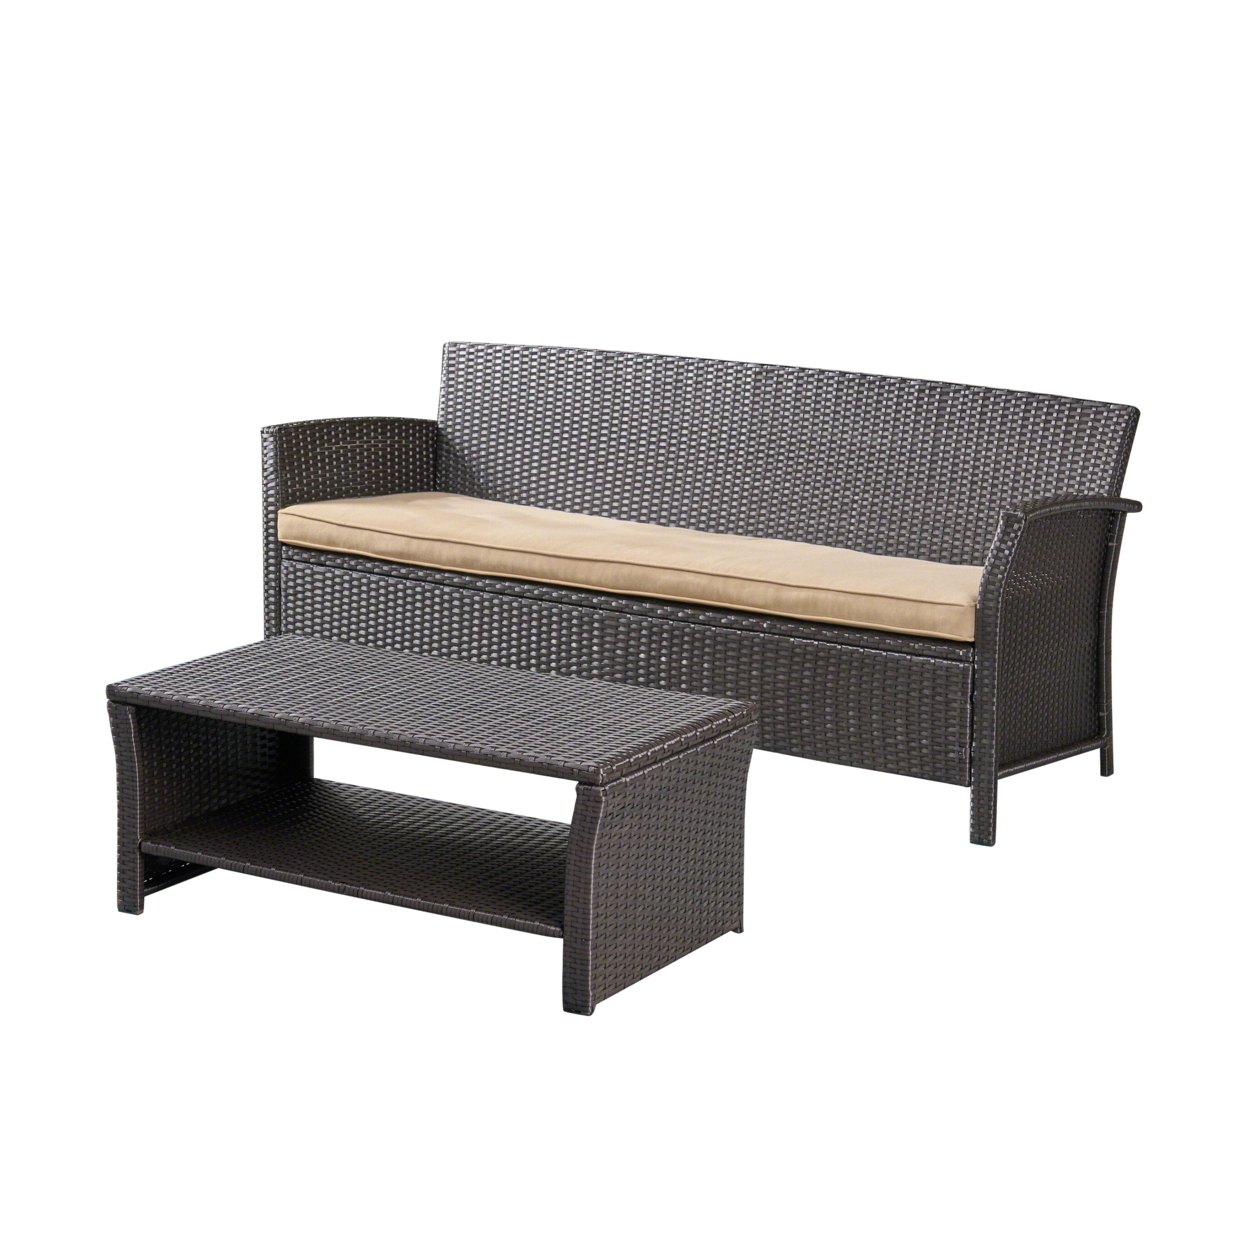 Lucia Outdoor Wicker 3-Seater Sofa With Coffee Table - Gray + Silver